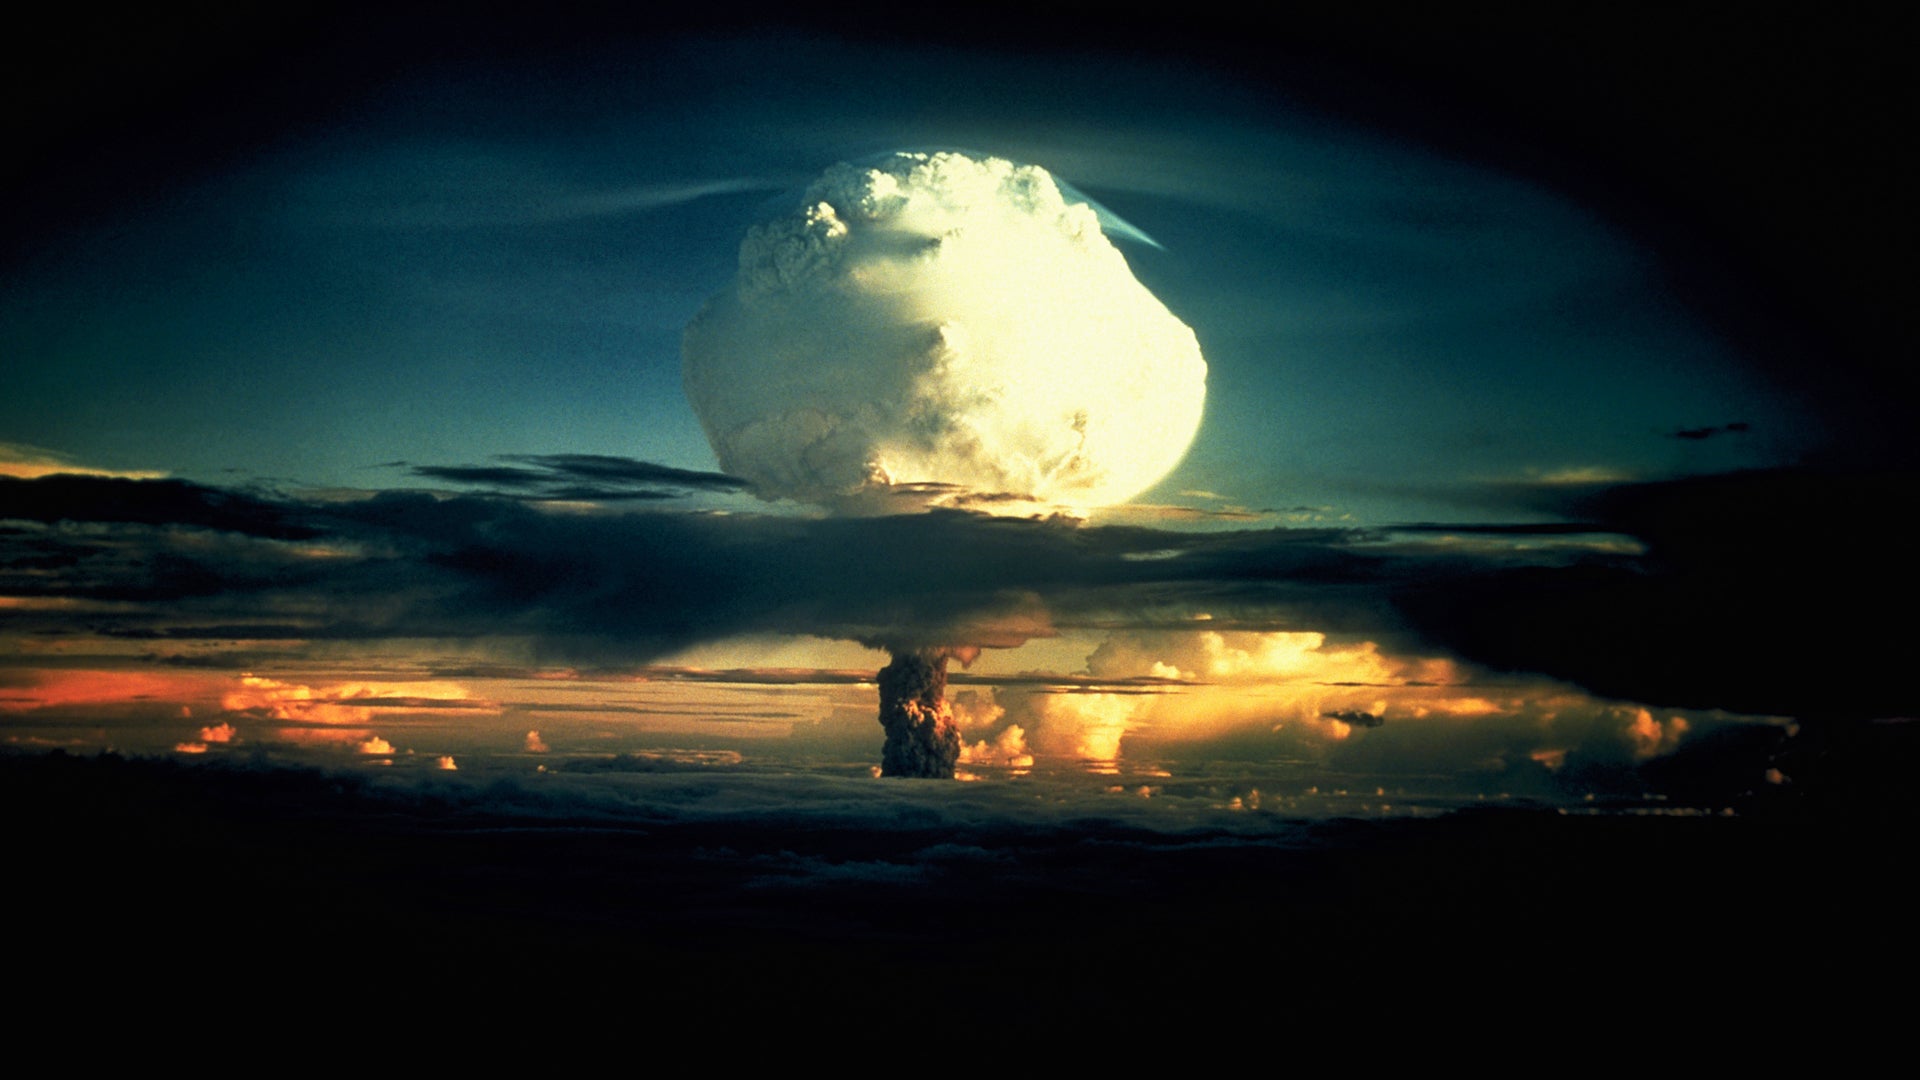 Operation Ivy Hydrogen Bomb Test in Marshall Islands A billowing white mushroom cloud, mottled with orange, pushes through a layer of clouds during Operation Ivy, the first test of a hydrogen bomb, at Enewetak Atoll in the Marshall Islands. (Photo by © CORBIS/Corbis via Getty Images)